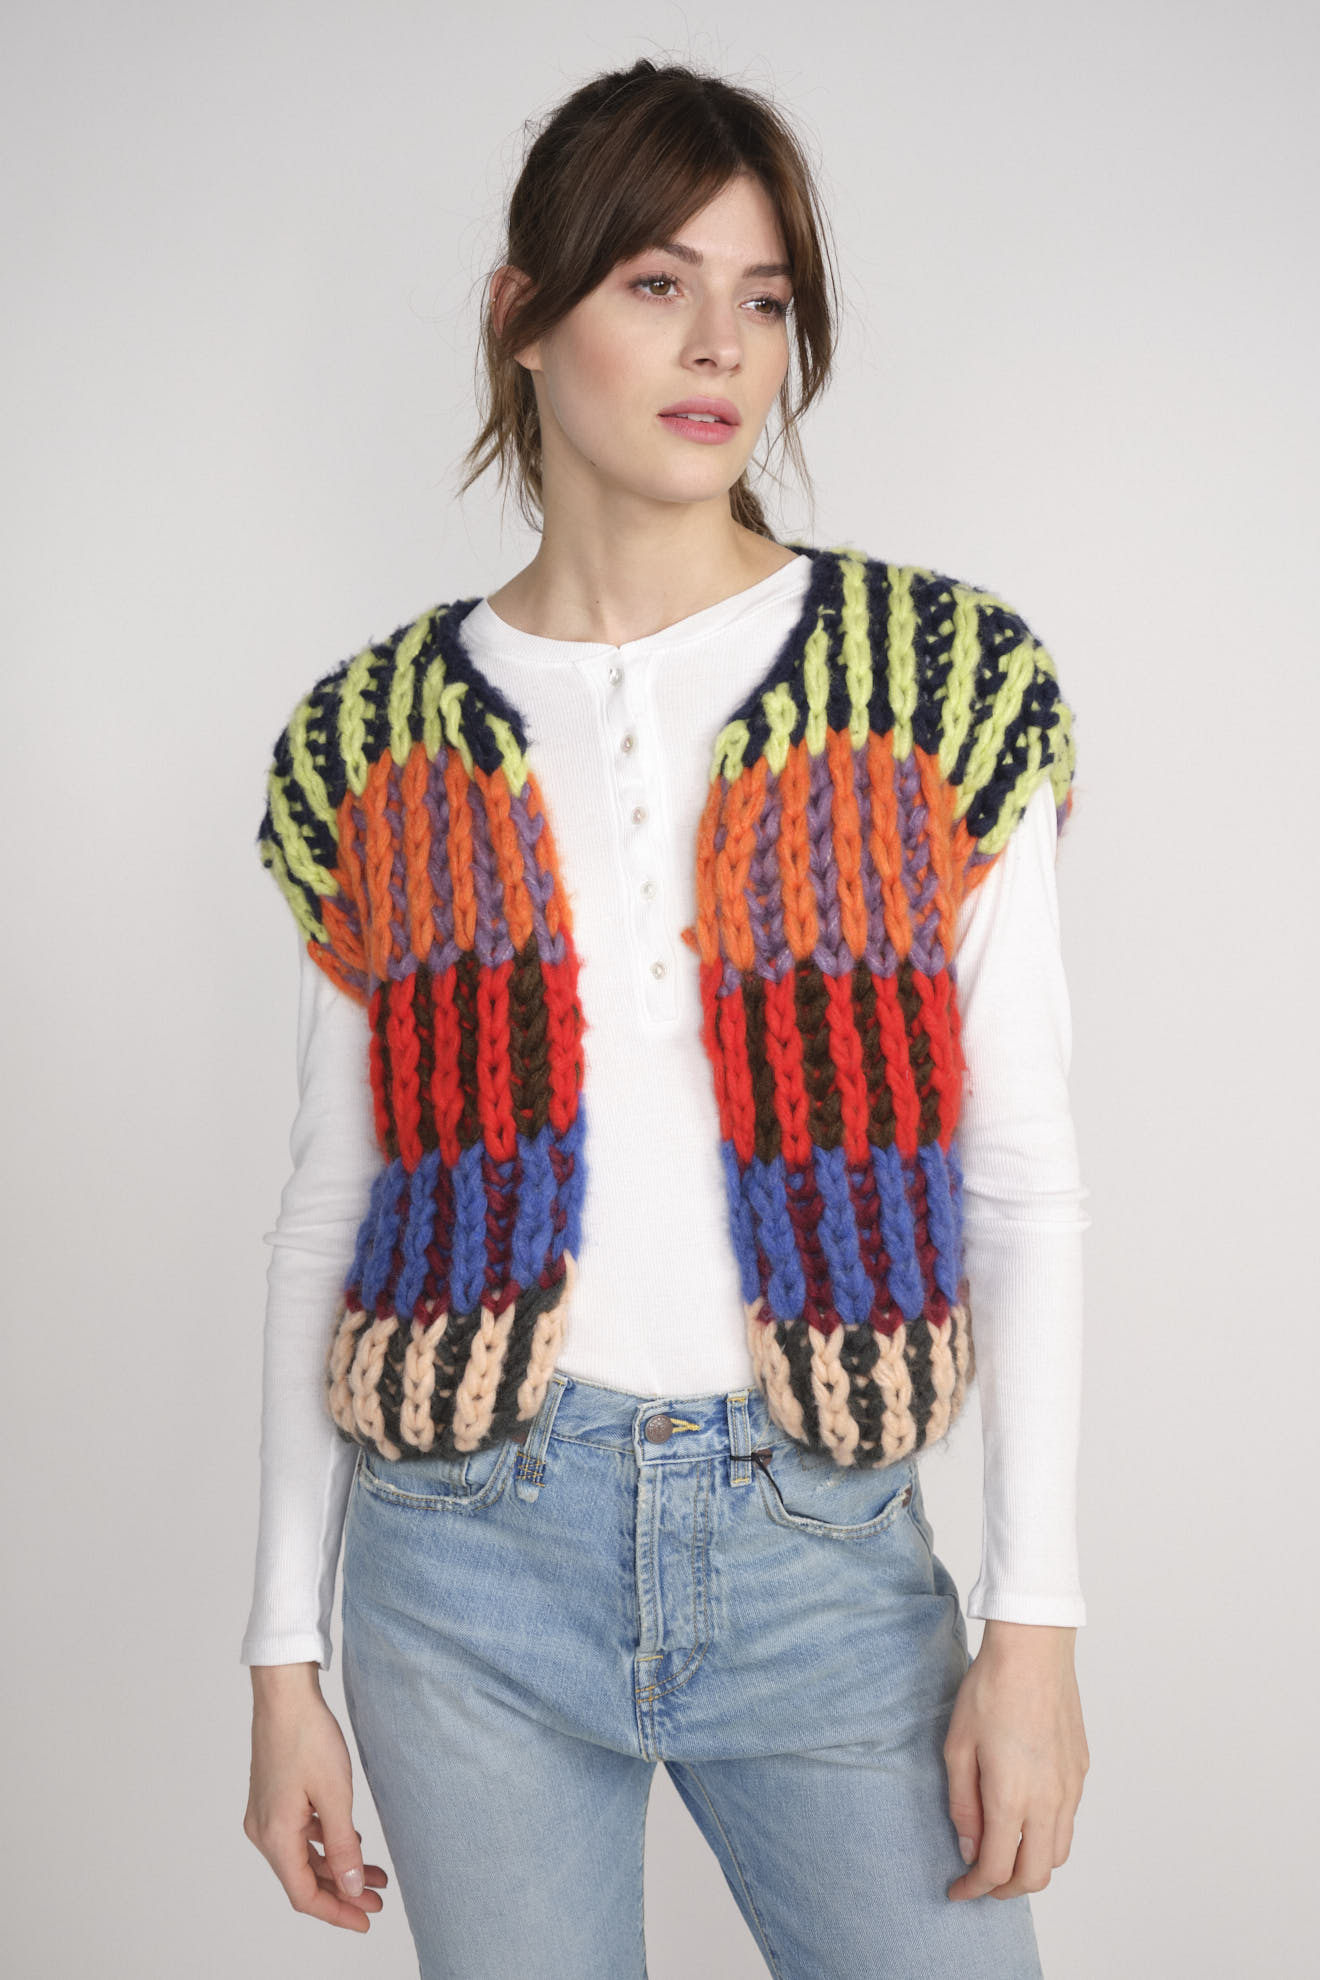 Maiami Cashmere Chunky vest - Colourful chunky knit cardigan in cashmere multi S/M